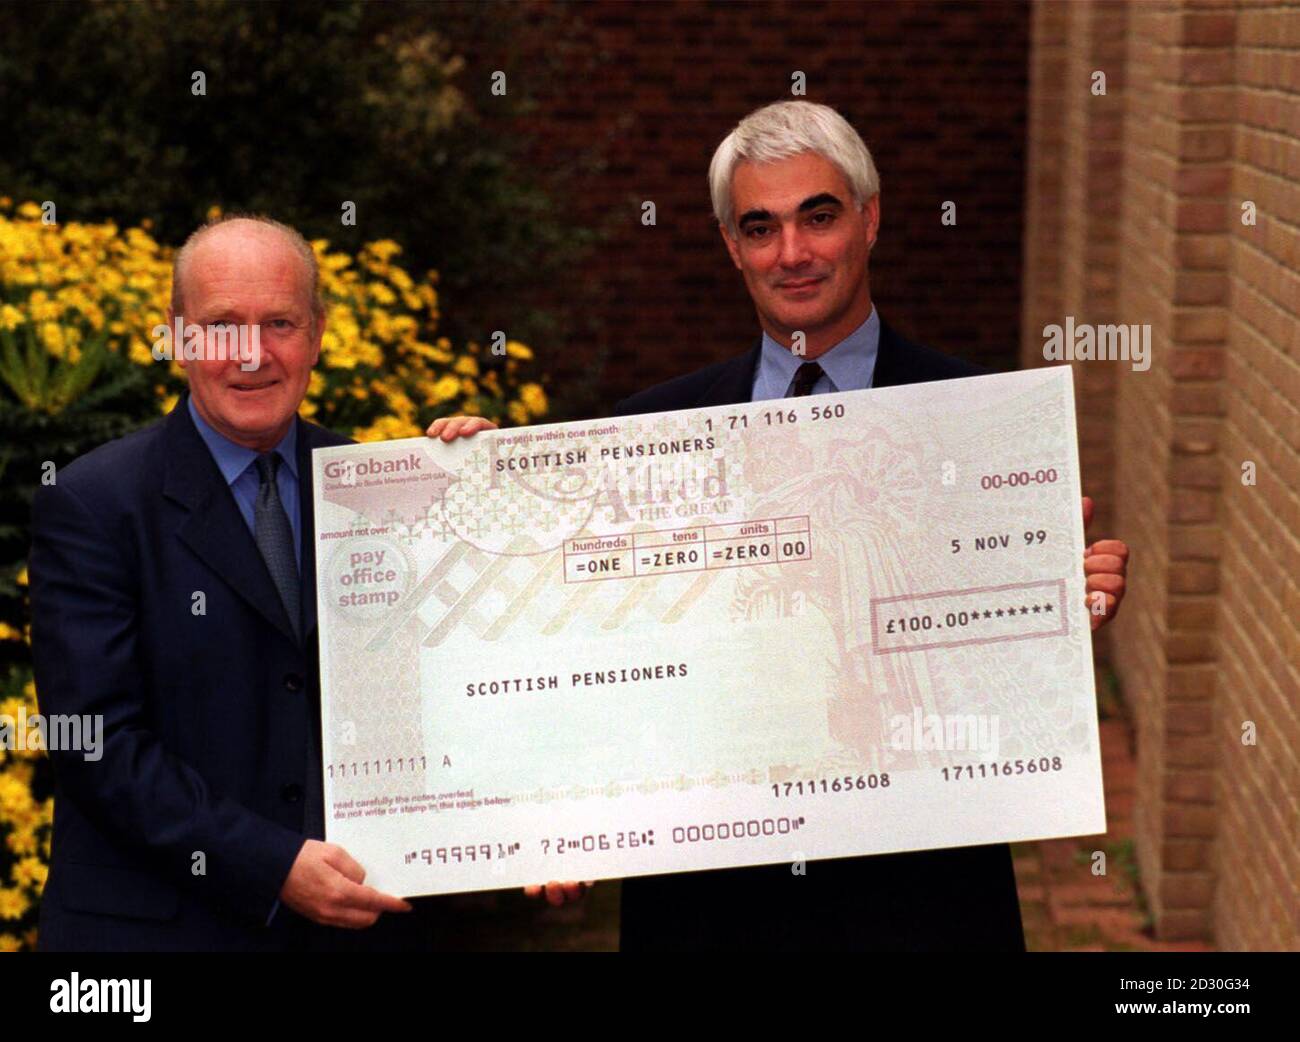 Secretary of State for Scotland John Reid (L) and Social Security Secretary Alistair Darling, in London, to announce that over 700,000 pensioners in Scotland would receive a cheque for  100 to help towards the cost of winter fuel bills.  Stock Photo